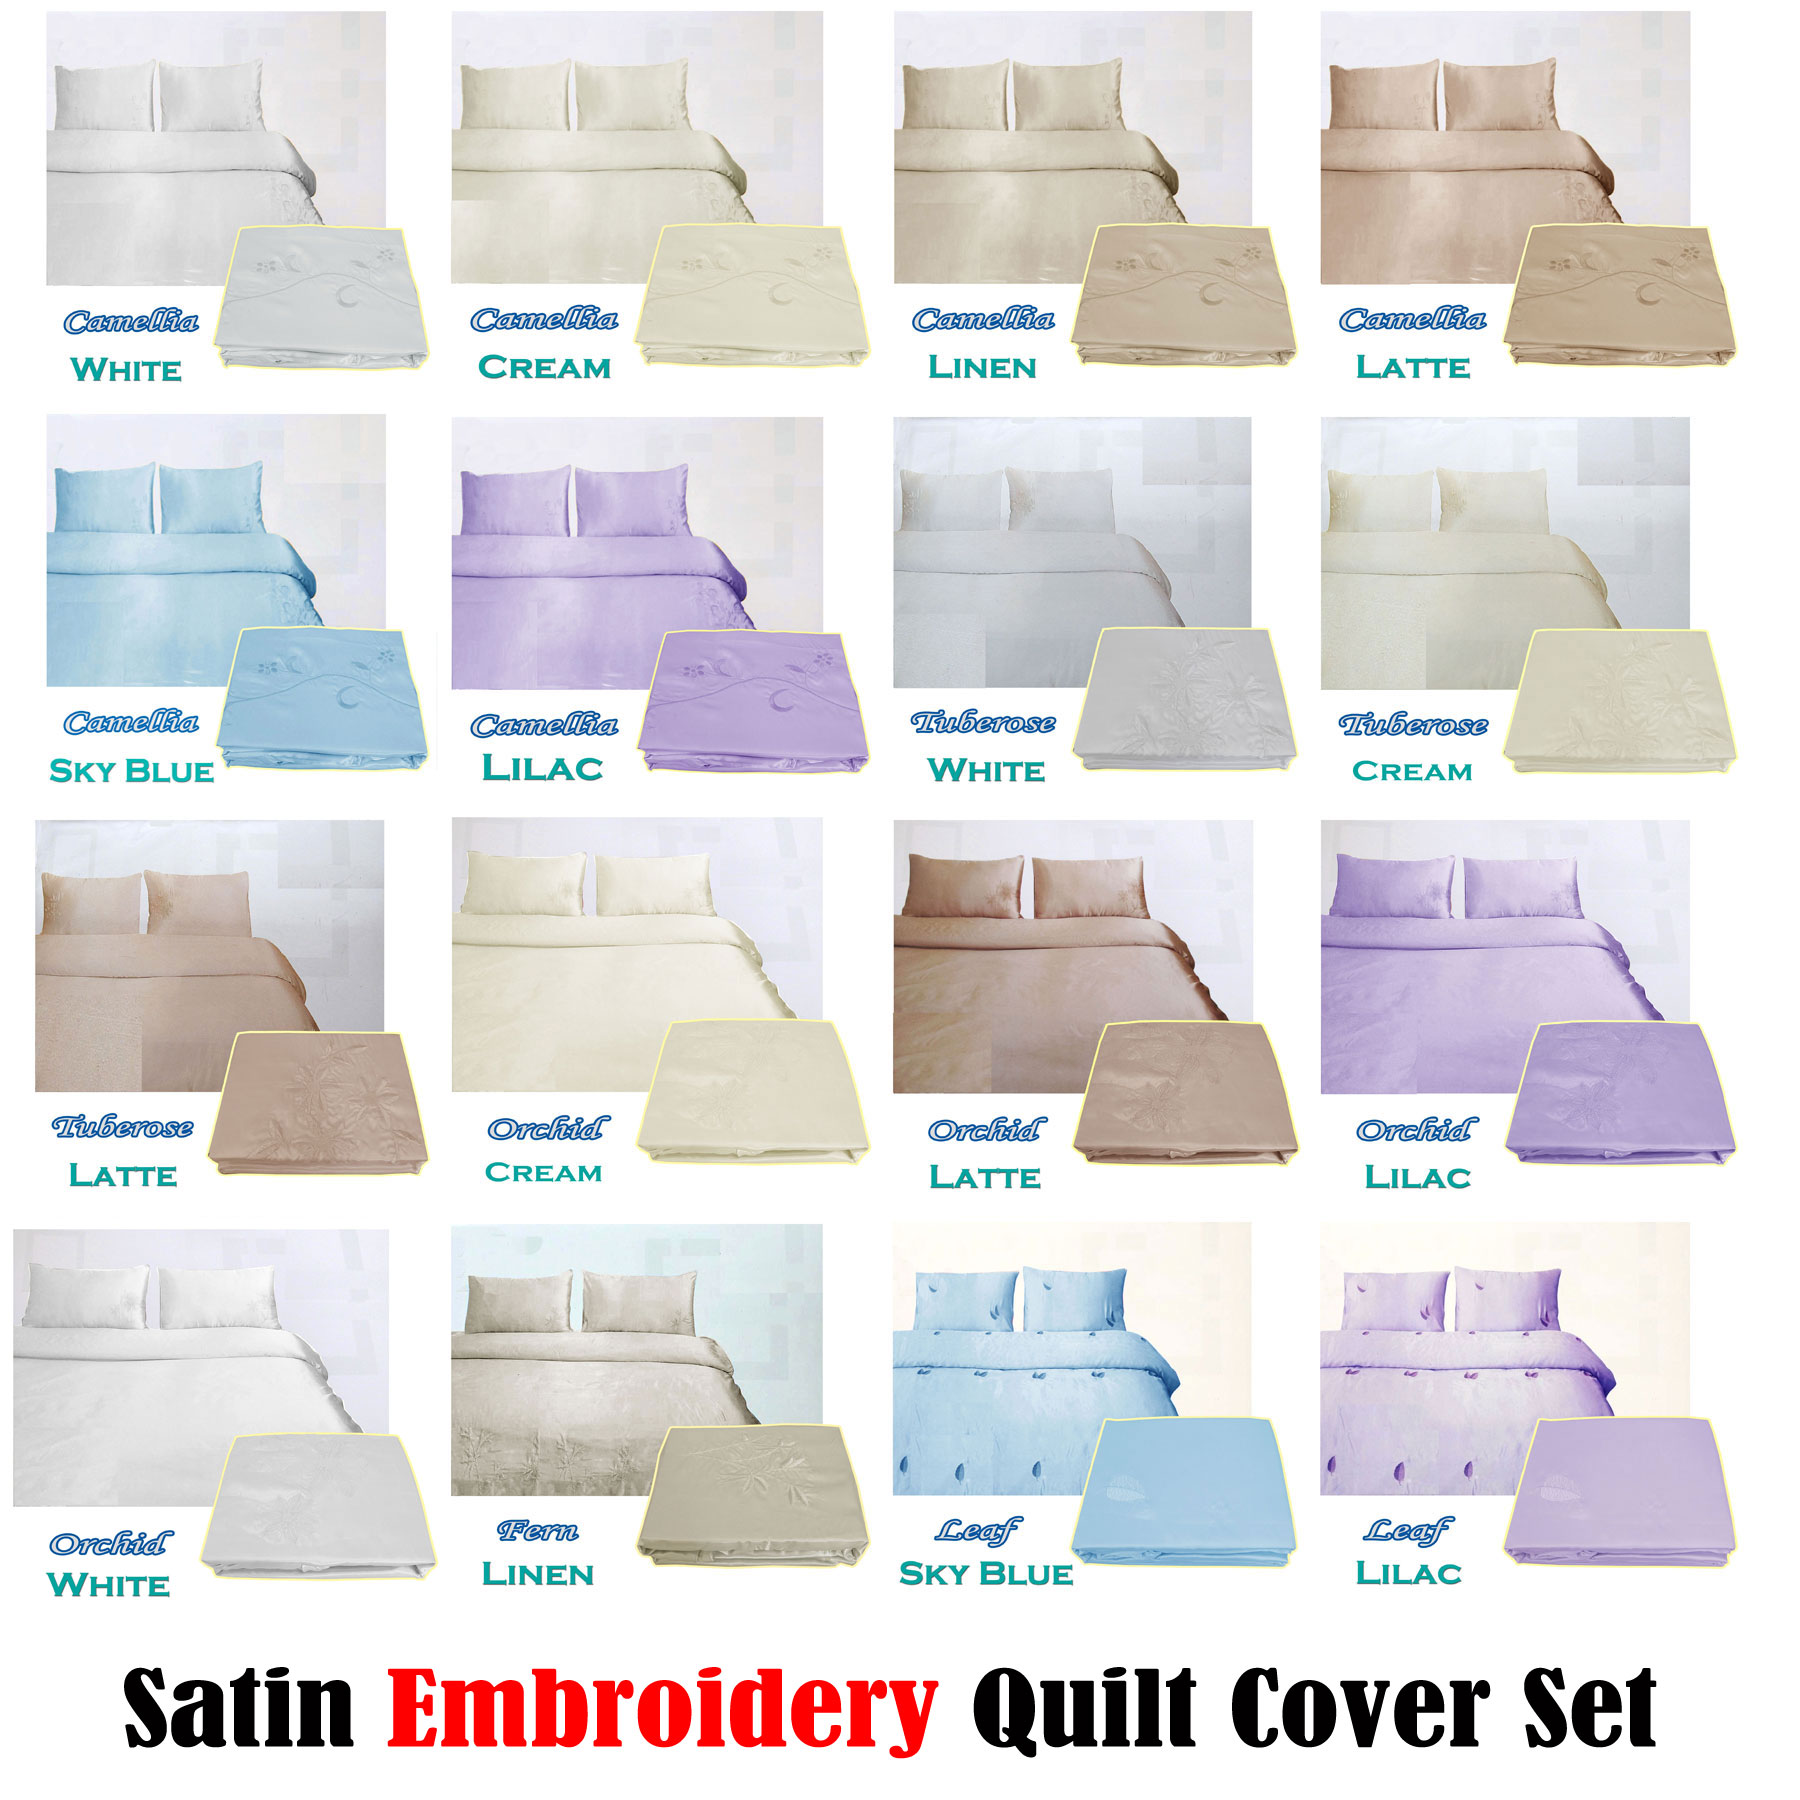 Satin Embroidery Quilt Cover Set